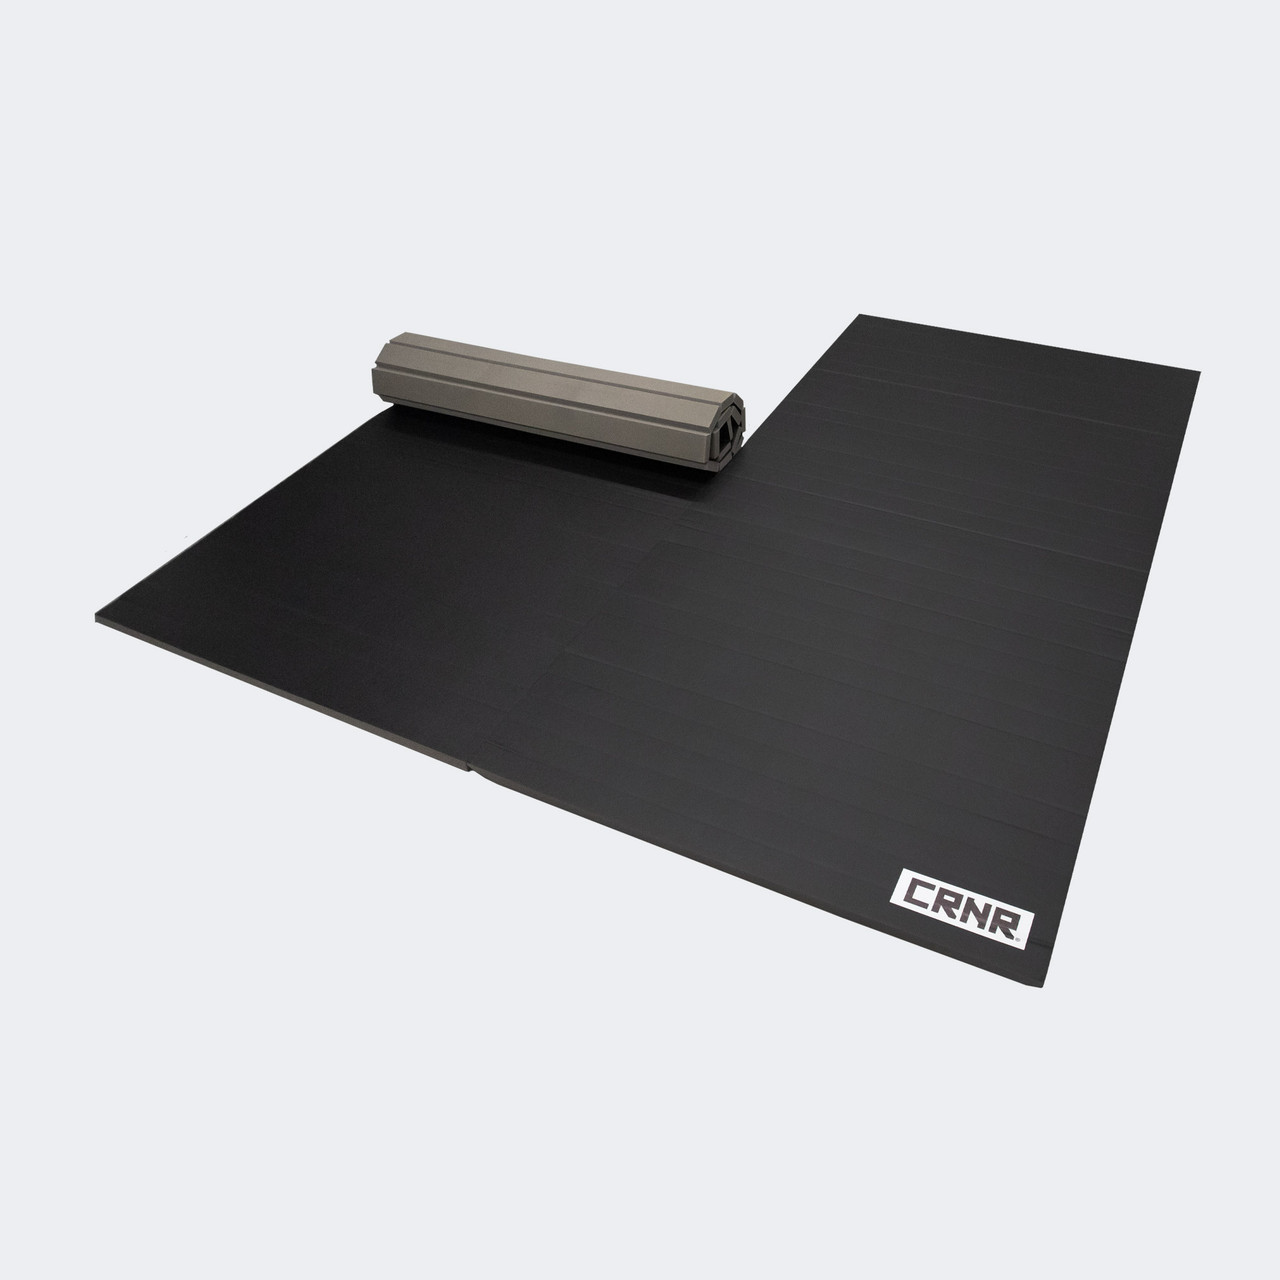 Roll Out Home Practice Mat + FREE SHIPPING*, Black